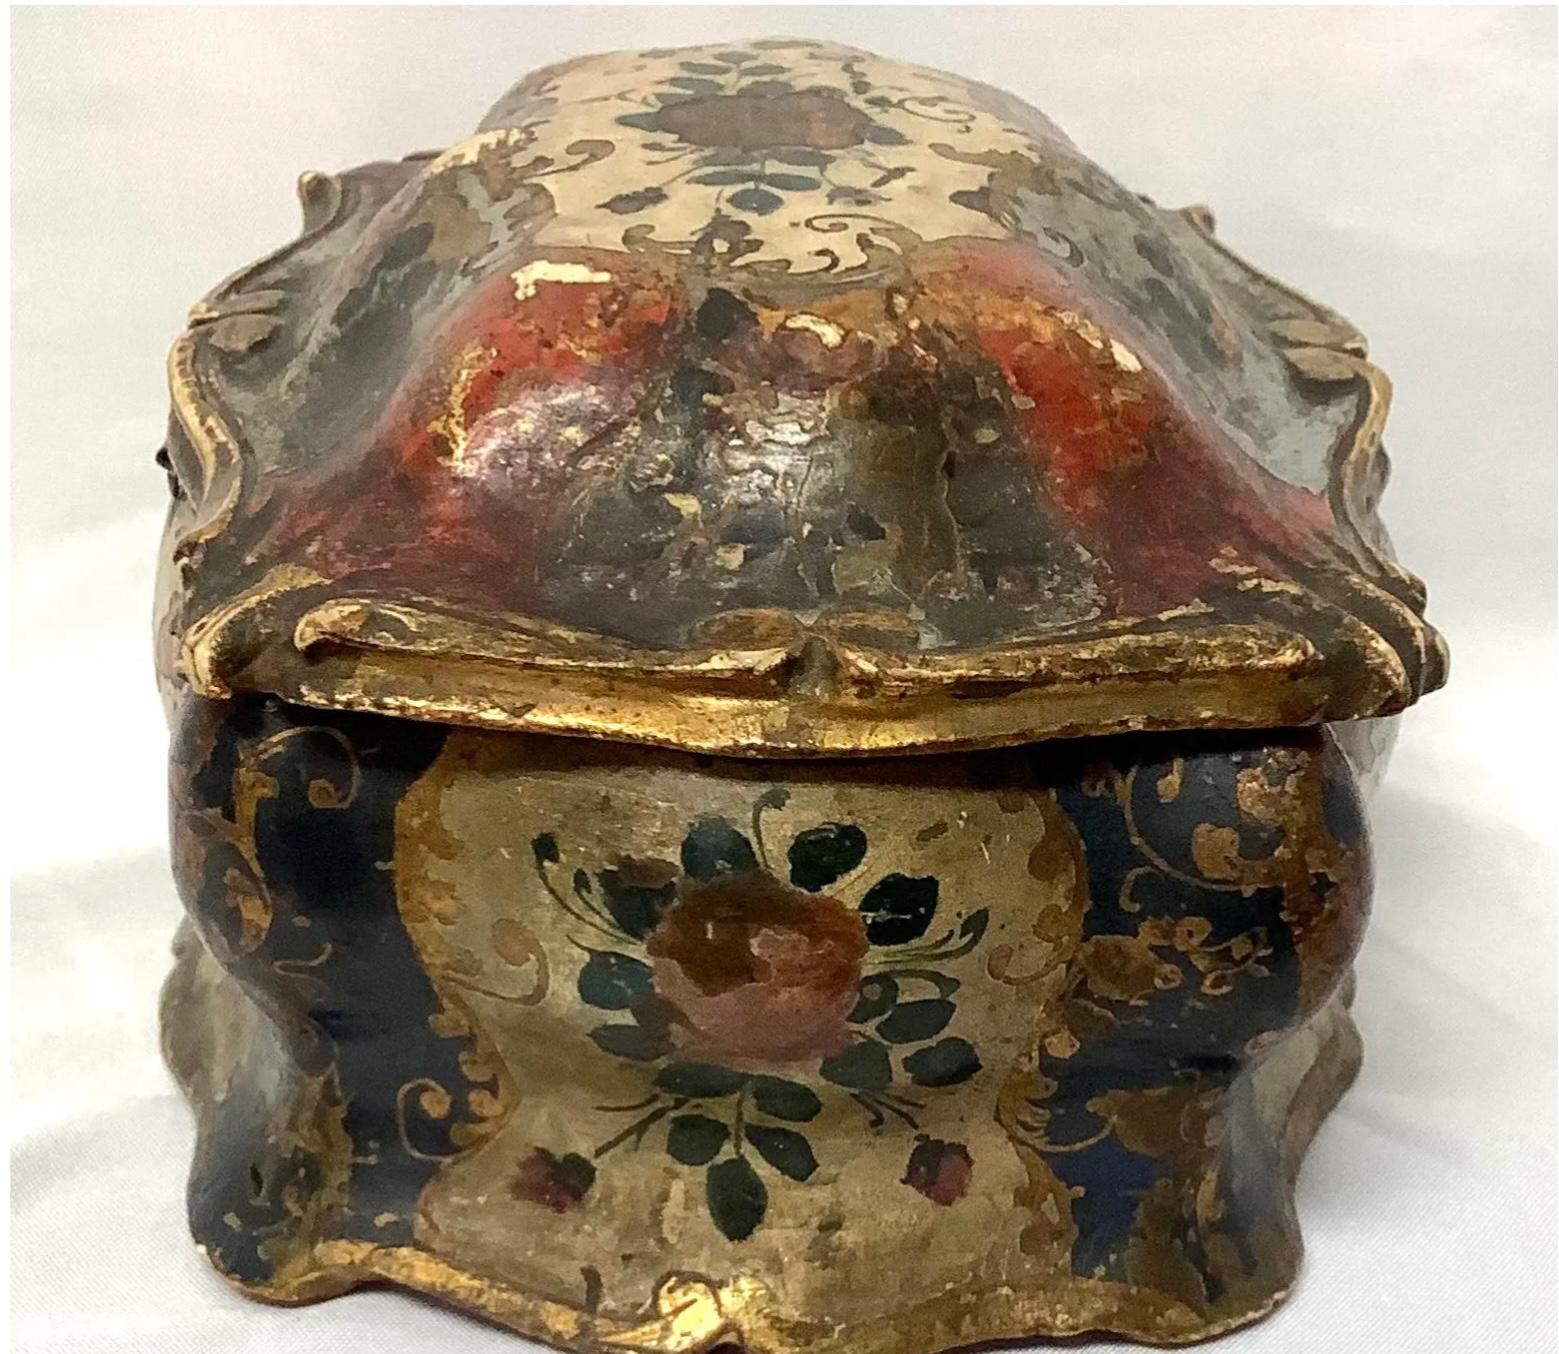 Antique Florentine painted and gilded trinket box, made in Italy marked on bottom. 

Dimensions:
6.5